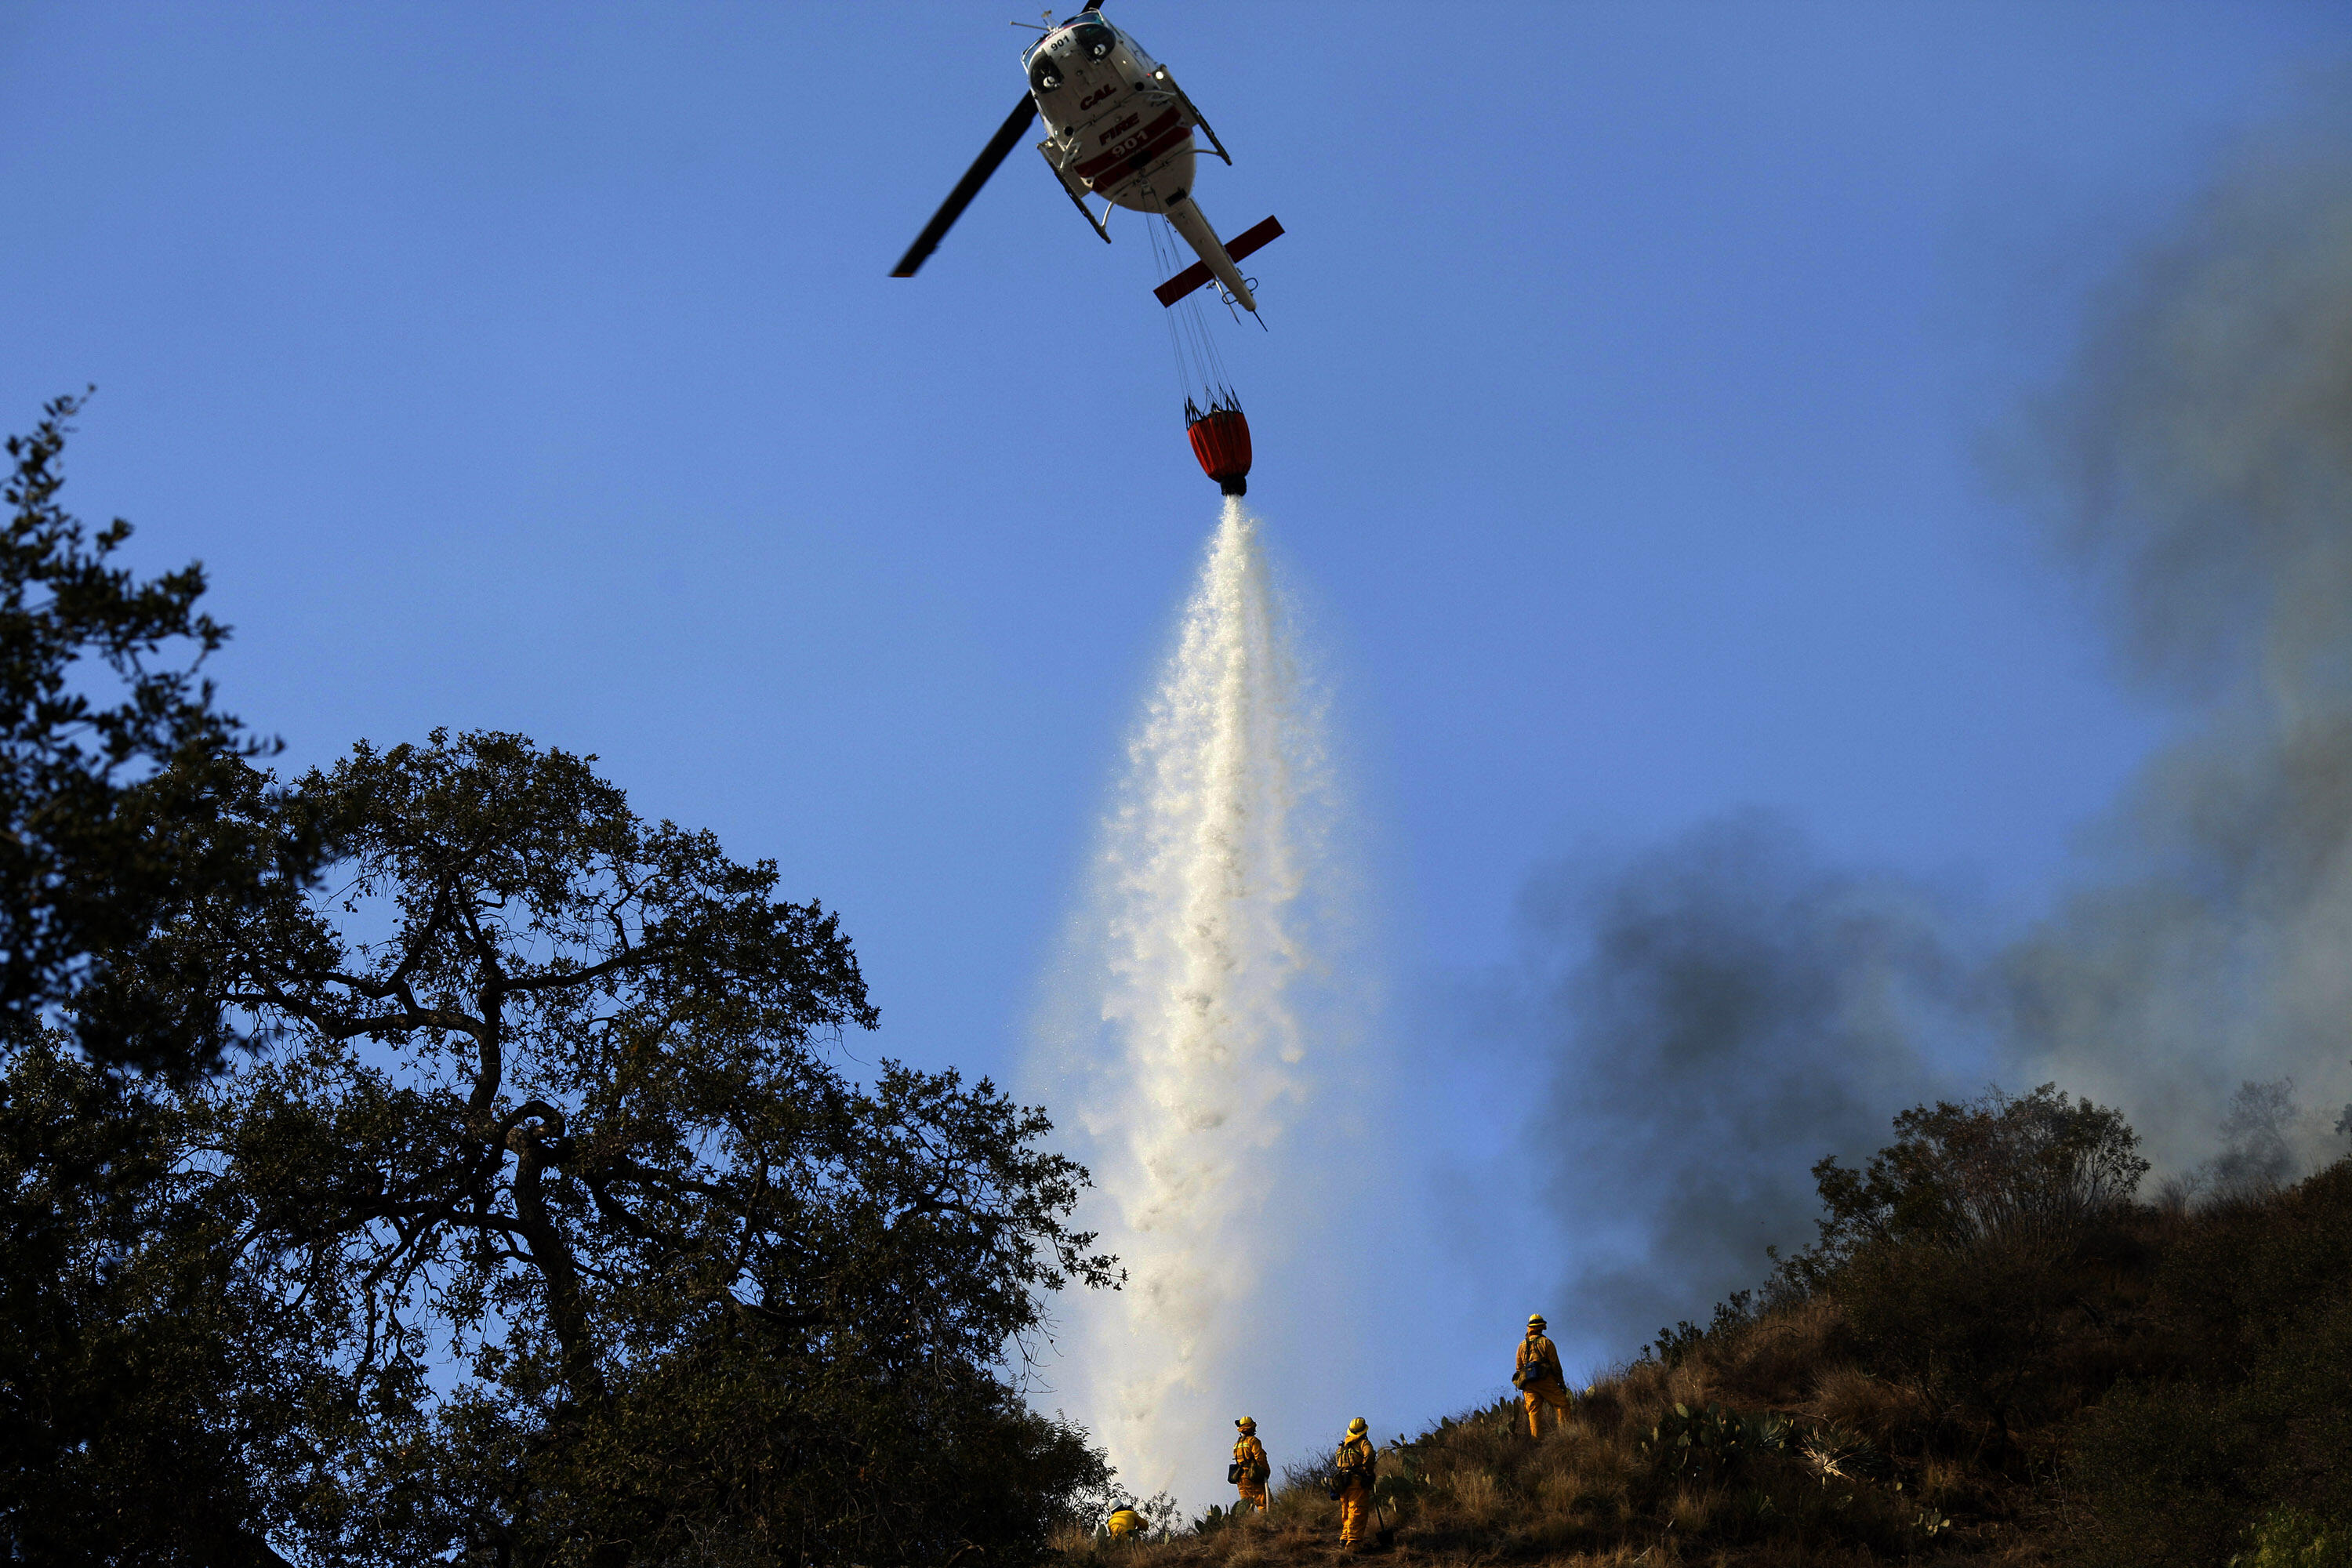 GLENDORA, CA - JANUARY 16: Helicopters drop water on the wildfires as they burn through the hillsides on January 16, 2014 in Glendora, California. A wildfire near Glendora in the San Gabriel Valley has prompted officials to order evacuations for houses ne